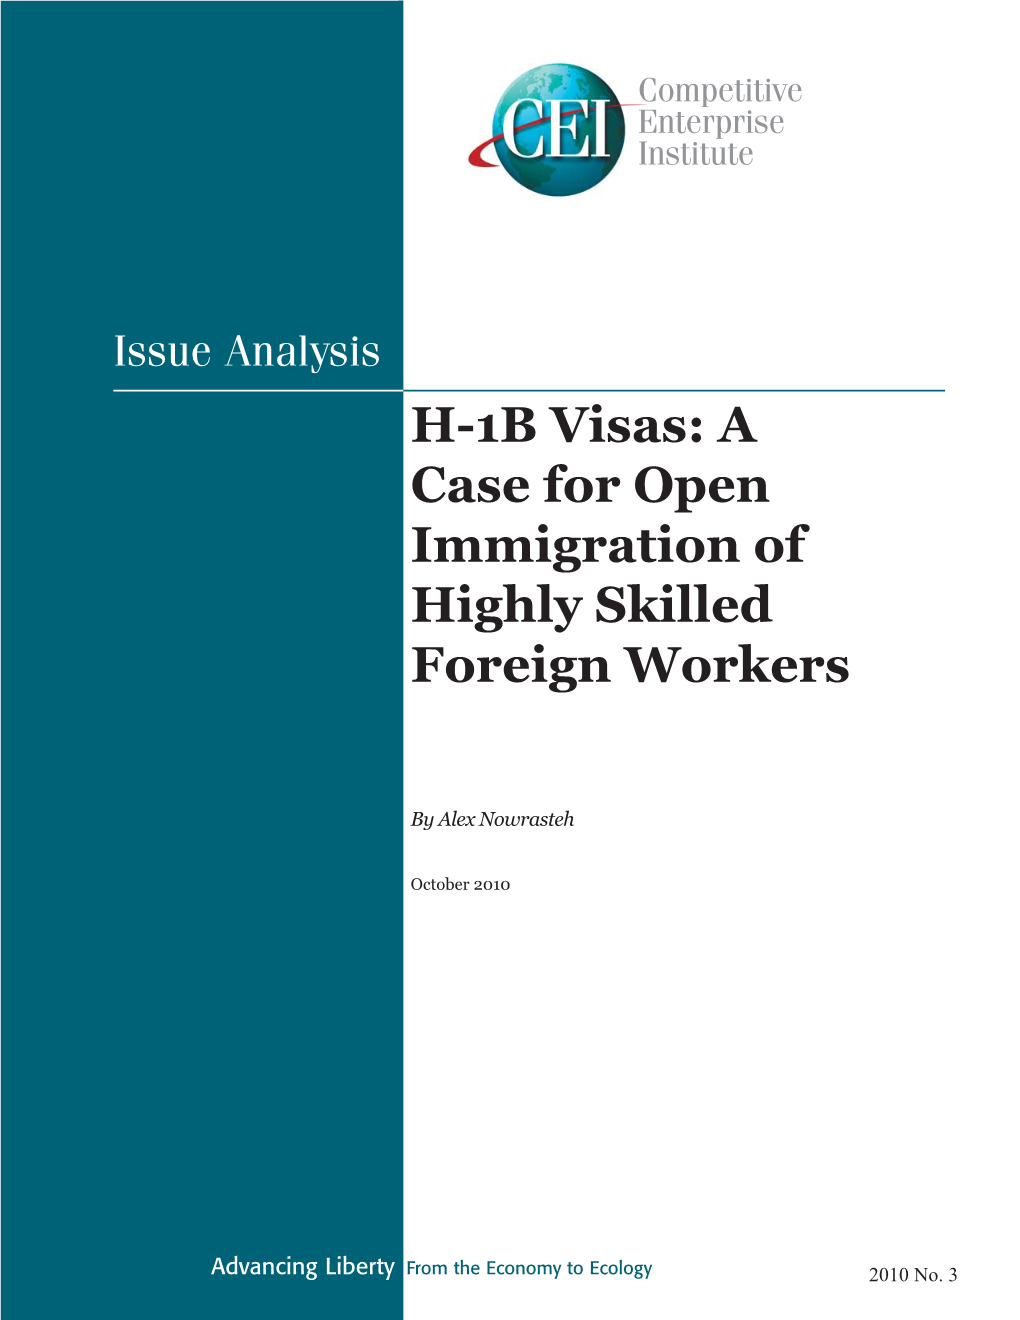 H-1B Visas: a Case for Open Immigration of Highly Skilled Foreign Workers